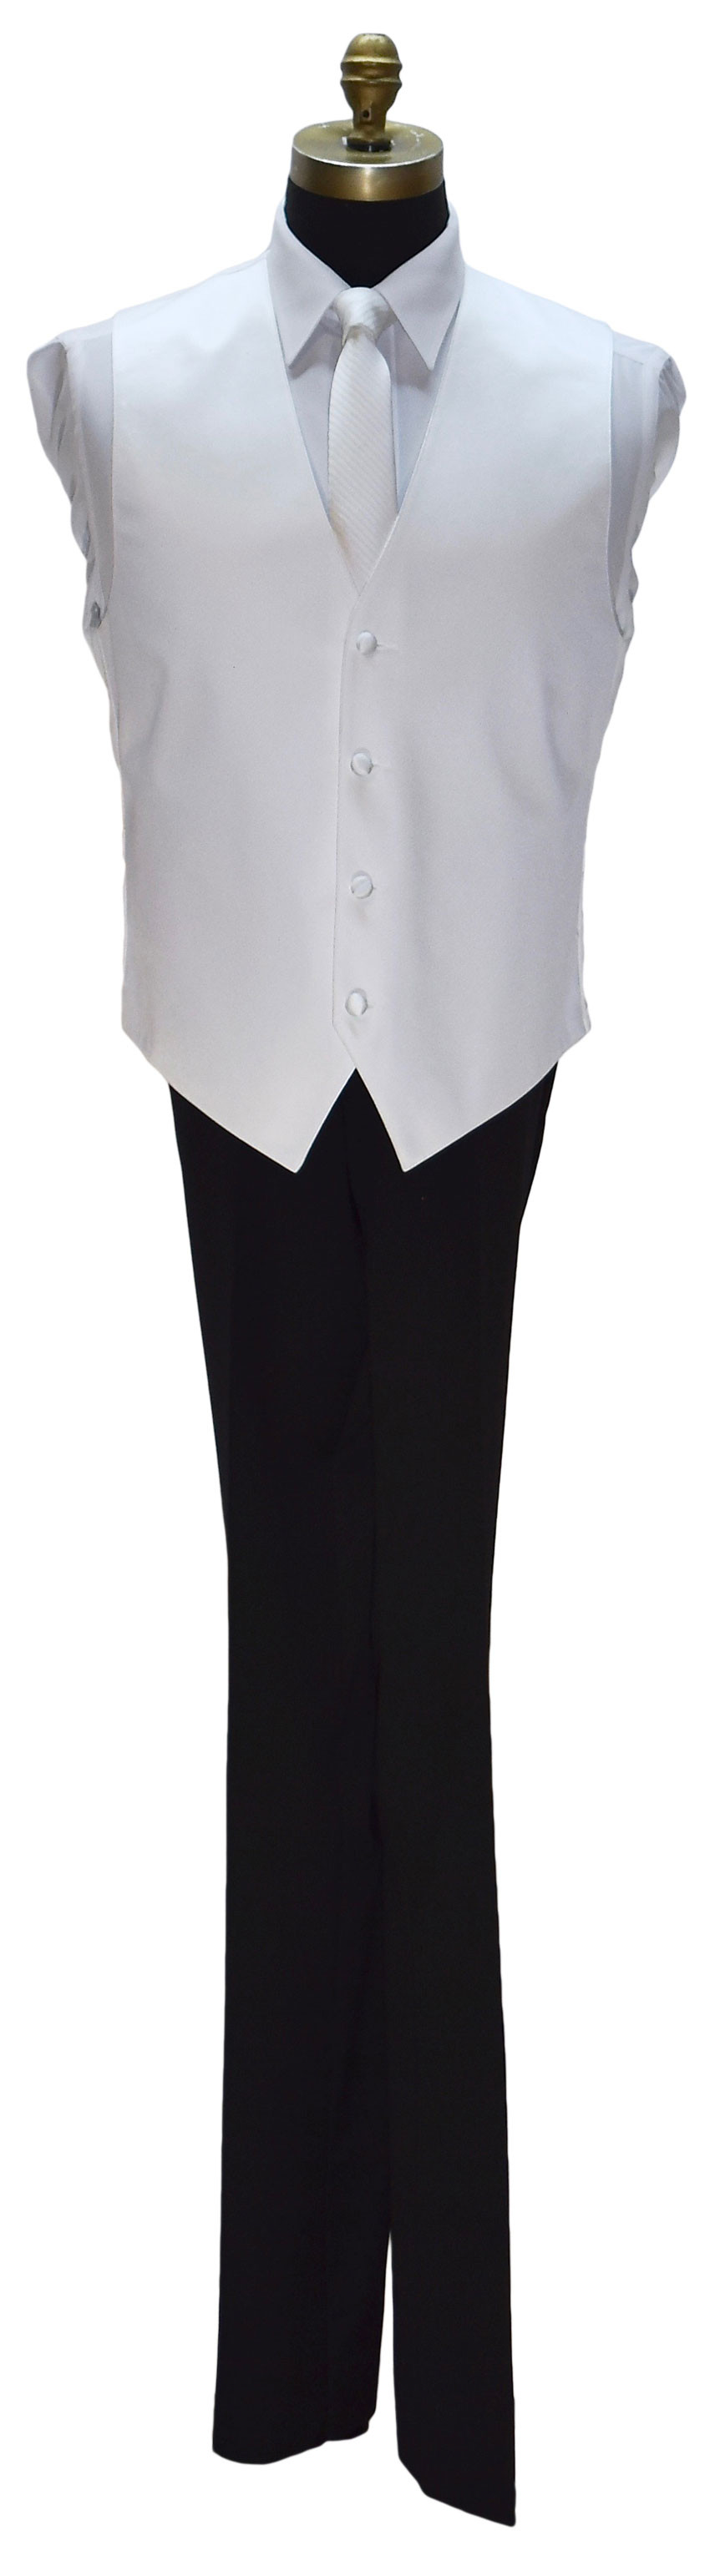 skinny white long tie with white vest by San Miguel Formals